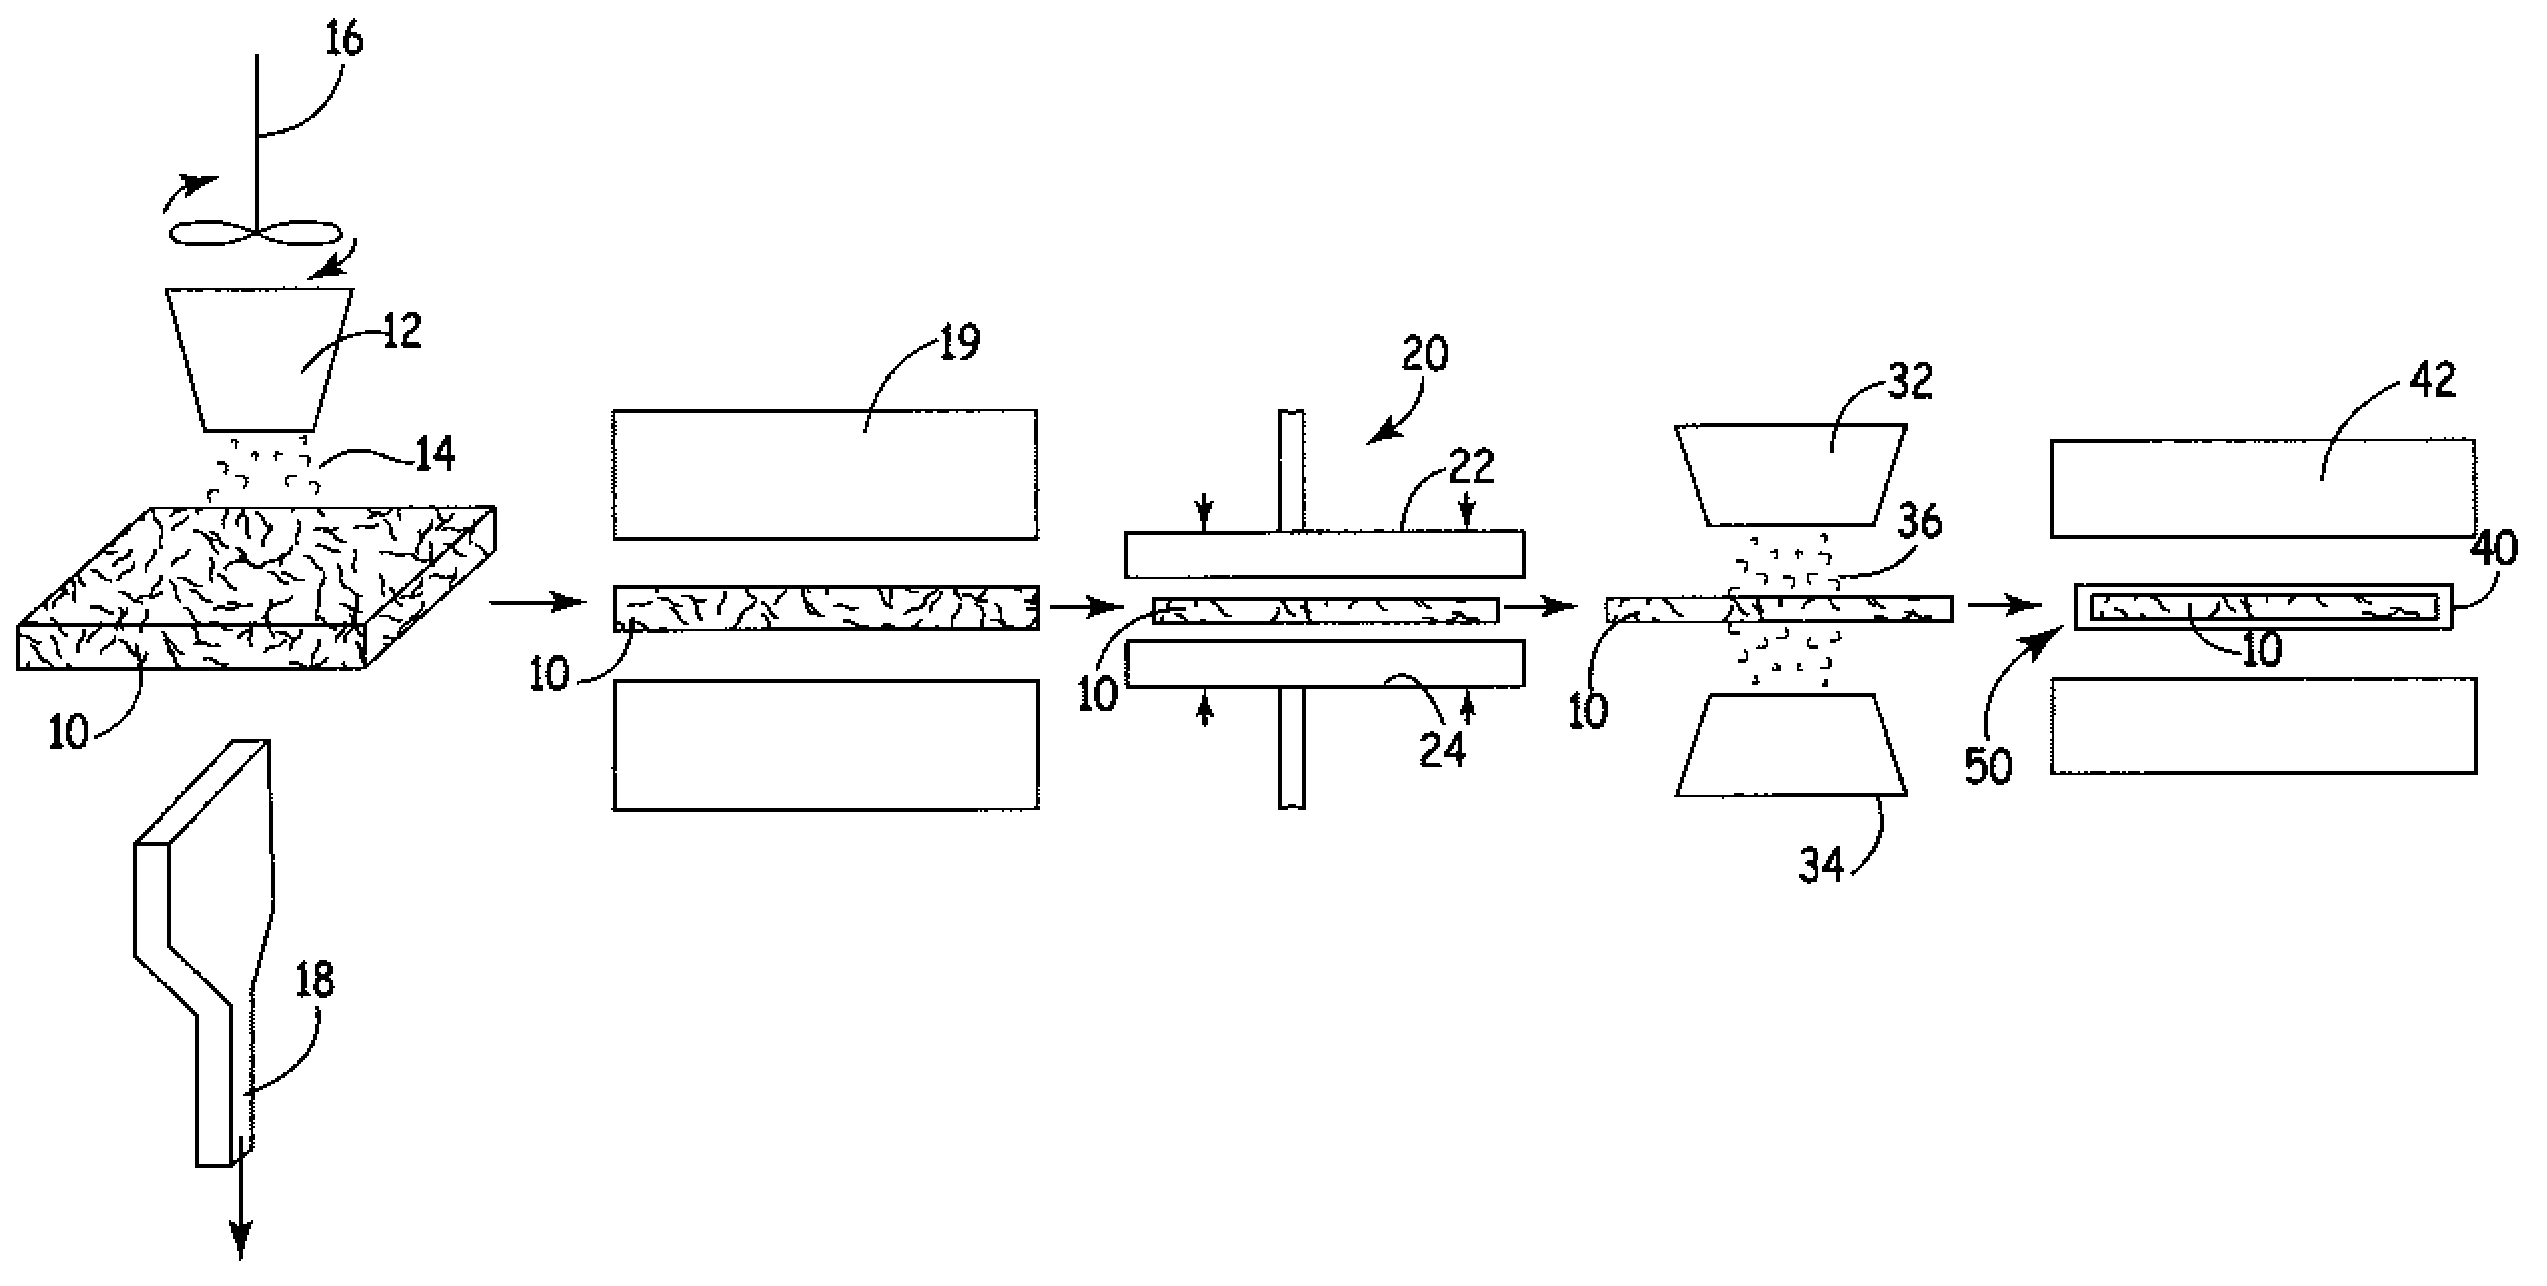 Fiber-containing article and method of manufacture